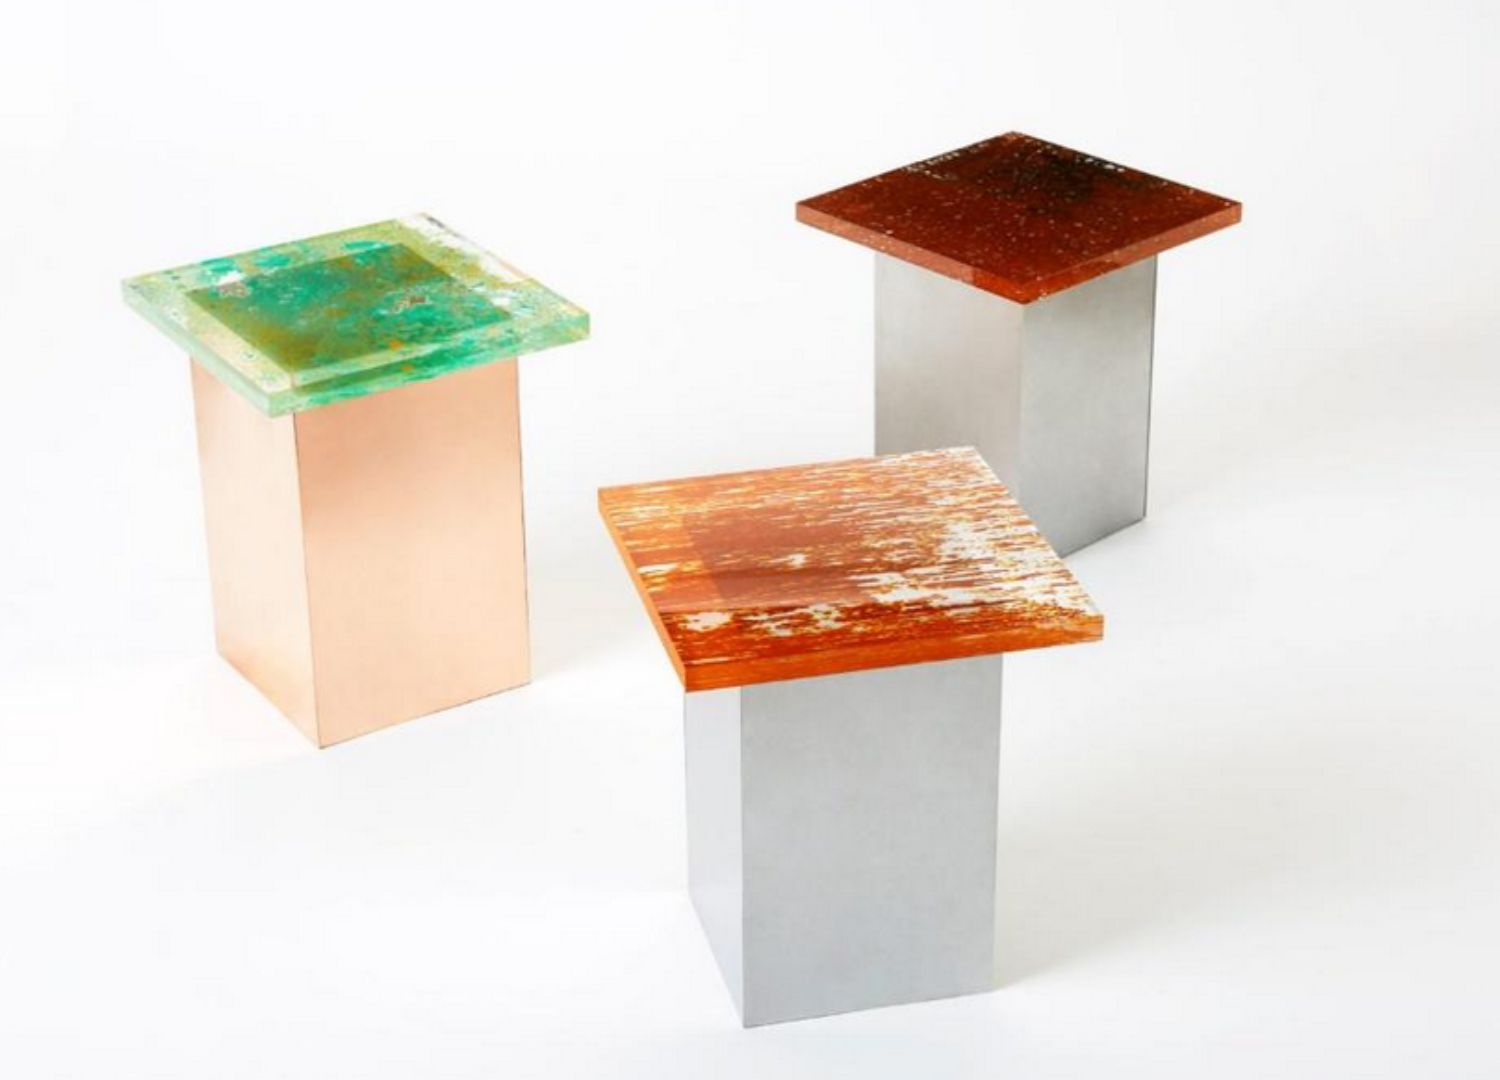 Rust furniture design collection by Studio Yumakano (3)